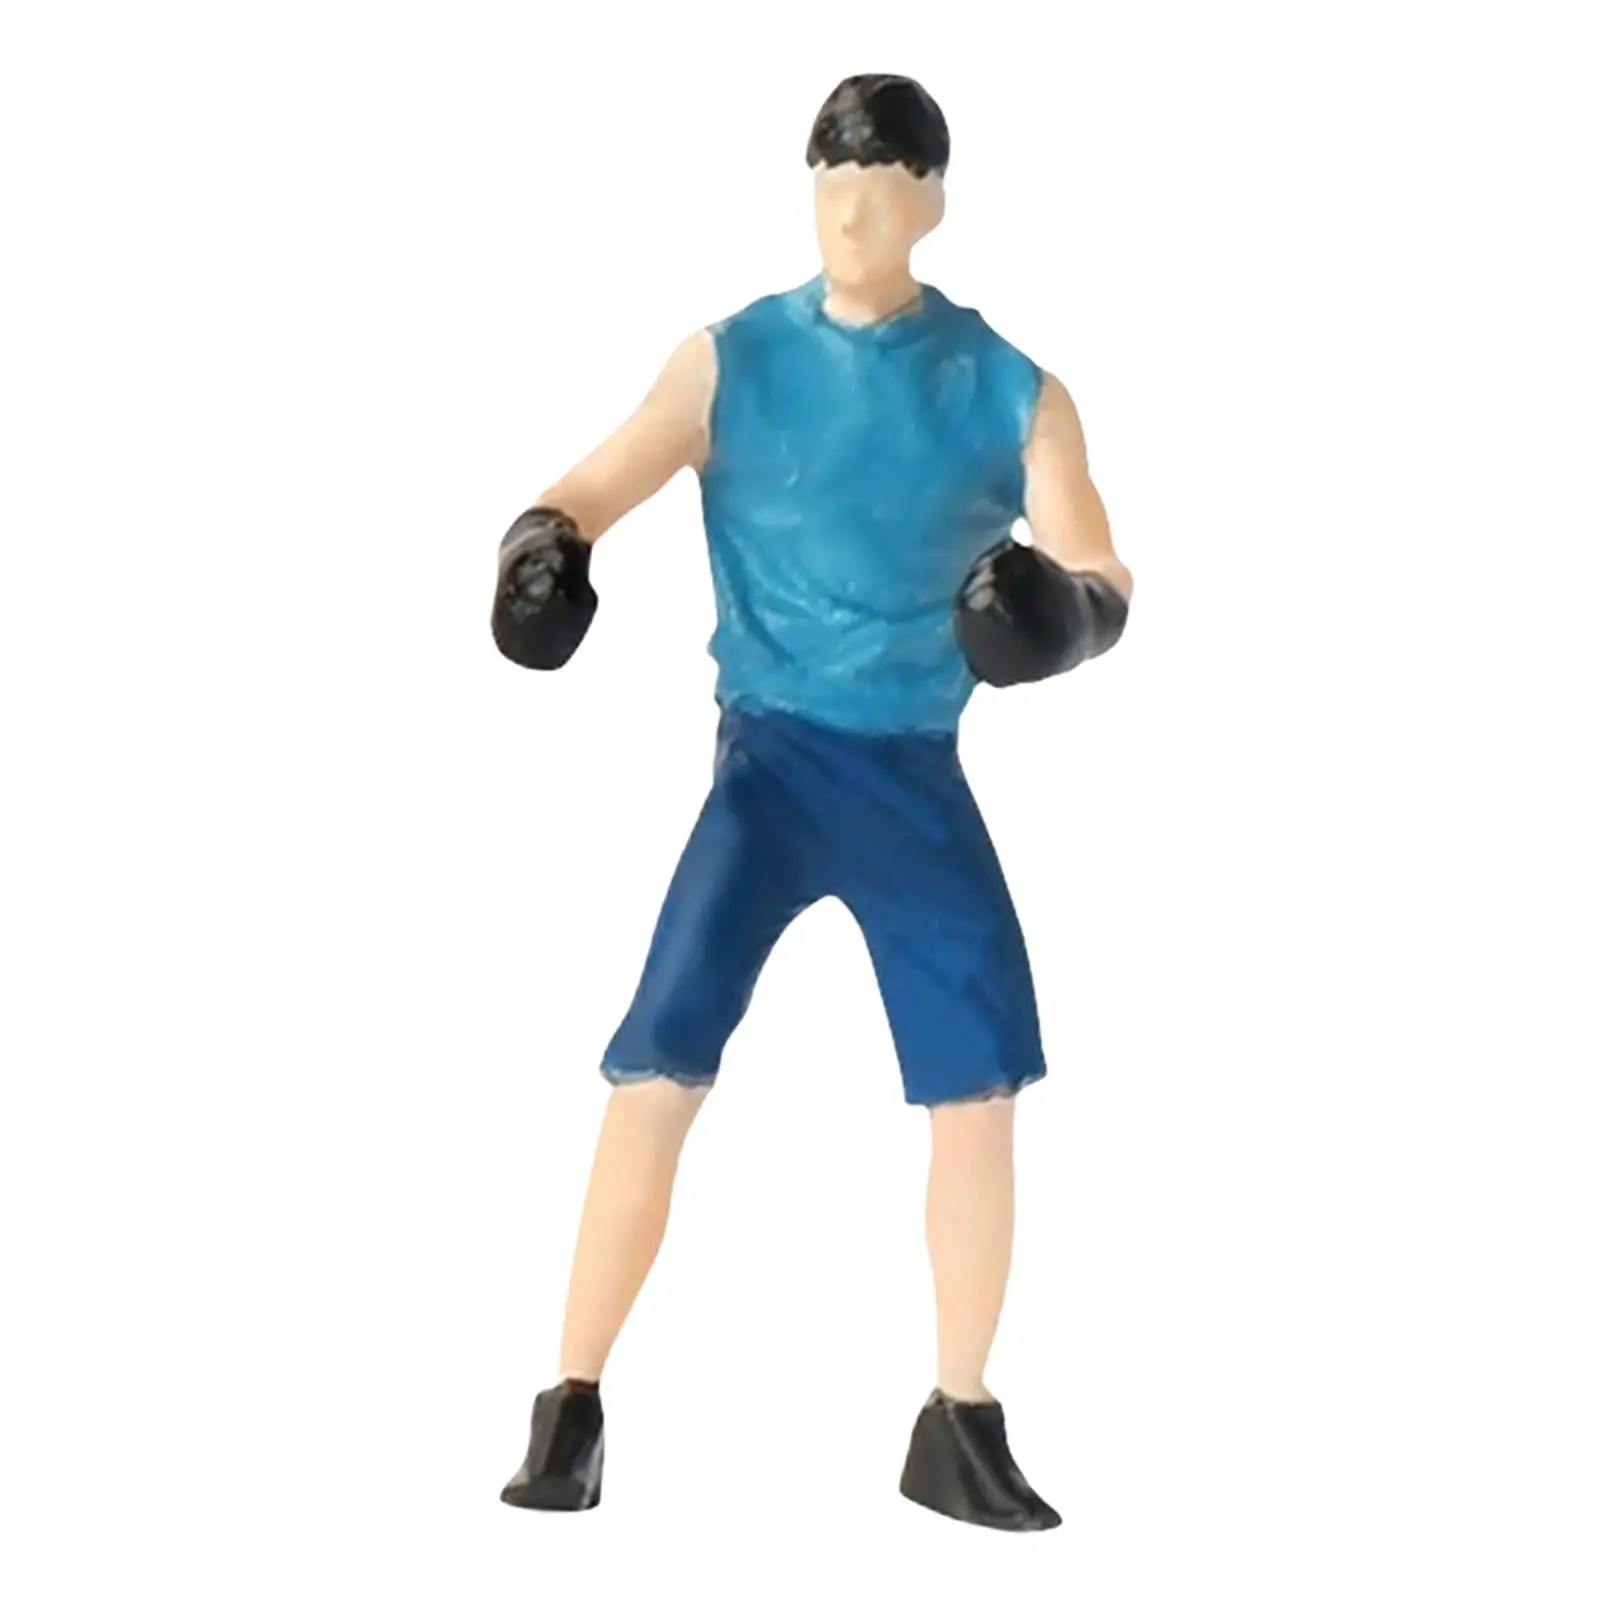 Realistic 1:64 Scale Models Figurine Boxing Man Model Figures Miniature Model Resin Doll Sandtable Decoration for Layout Decor